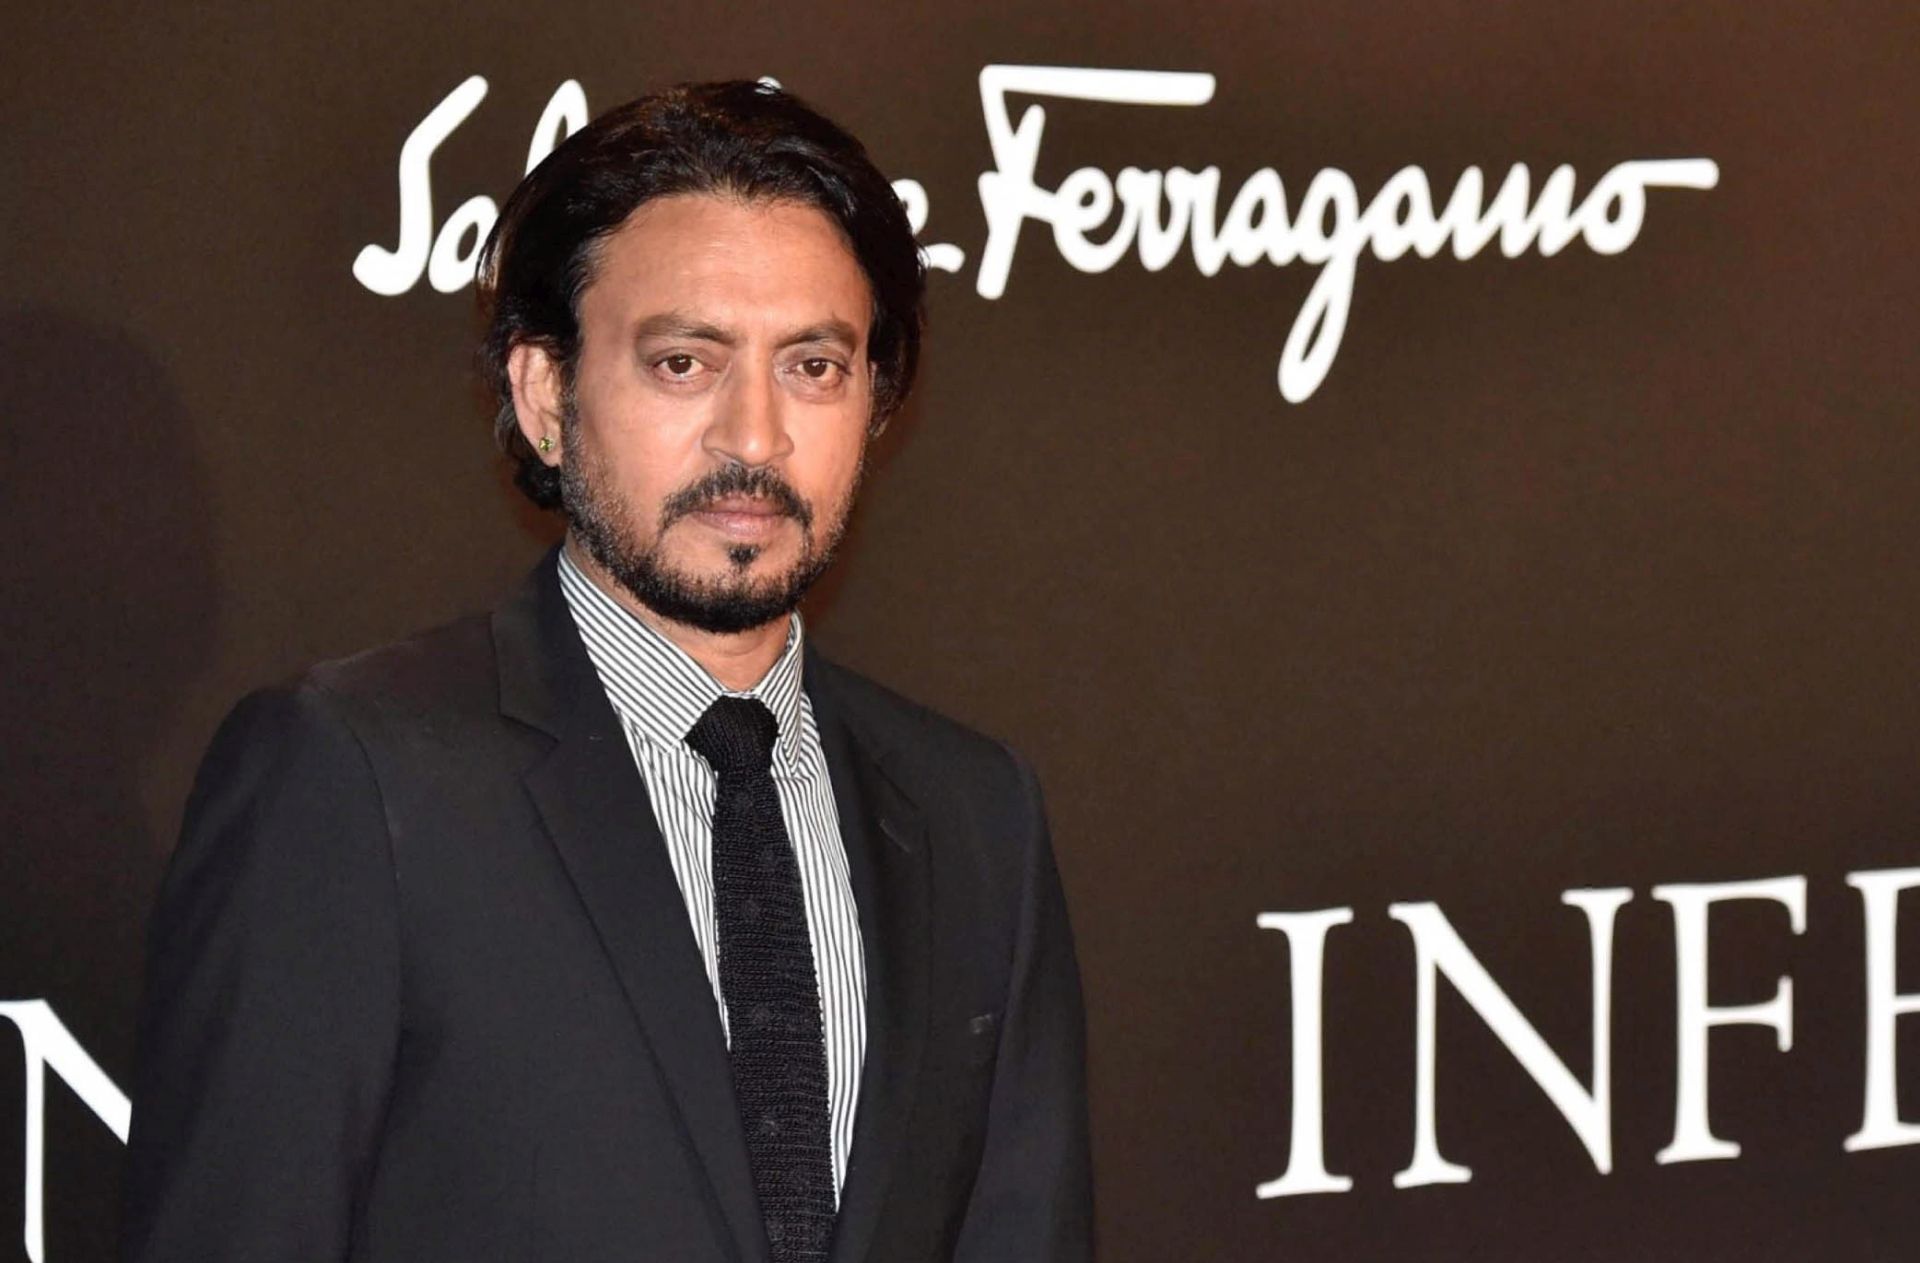 epa08390603 (FILE) - Indian actor/cast member Irrfan Khan poses for photos during the premiere of the movie 'Inferno', directed by Ron Howard, at the Opera House in Florence, Italy, 08 October 2016 (reissude 29 April 2020). Media reports state on 29 April 2020 that Bollywood actor Irrfan Khan has died at the age of 53 in Mumbai, India.  EPA/MAURIZIO DEGLI INNOCENTI *** Local Caption *** 53059047